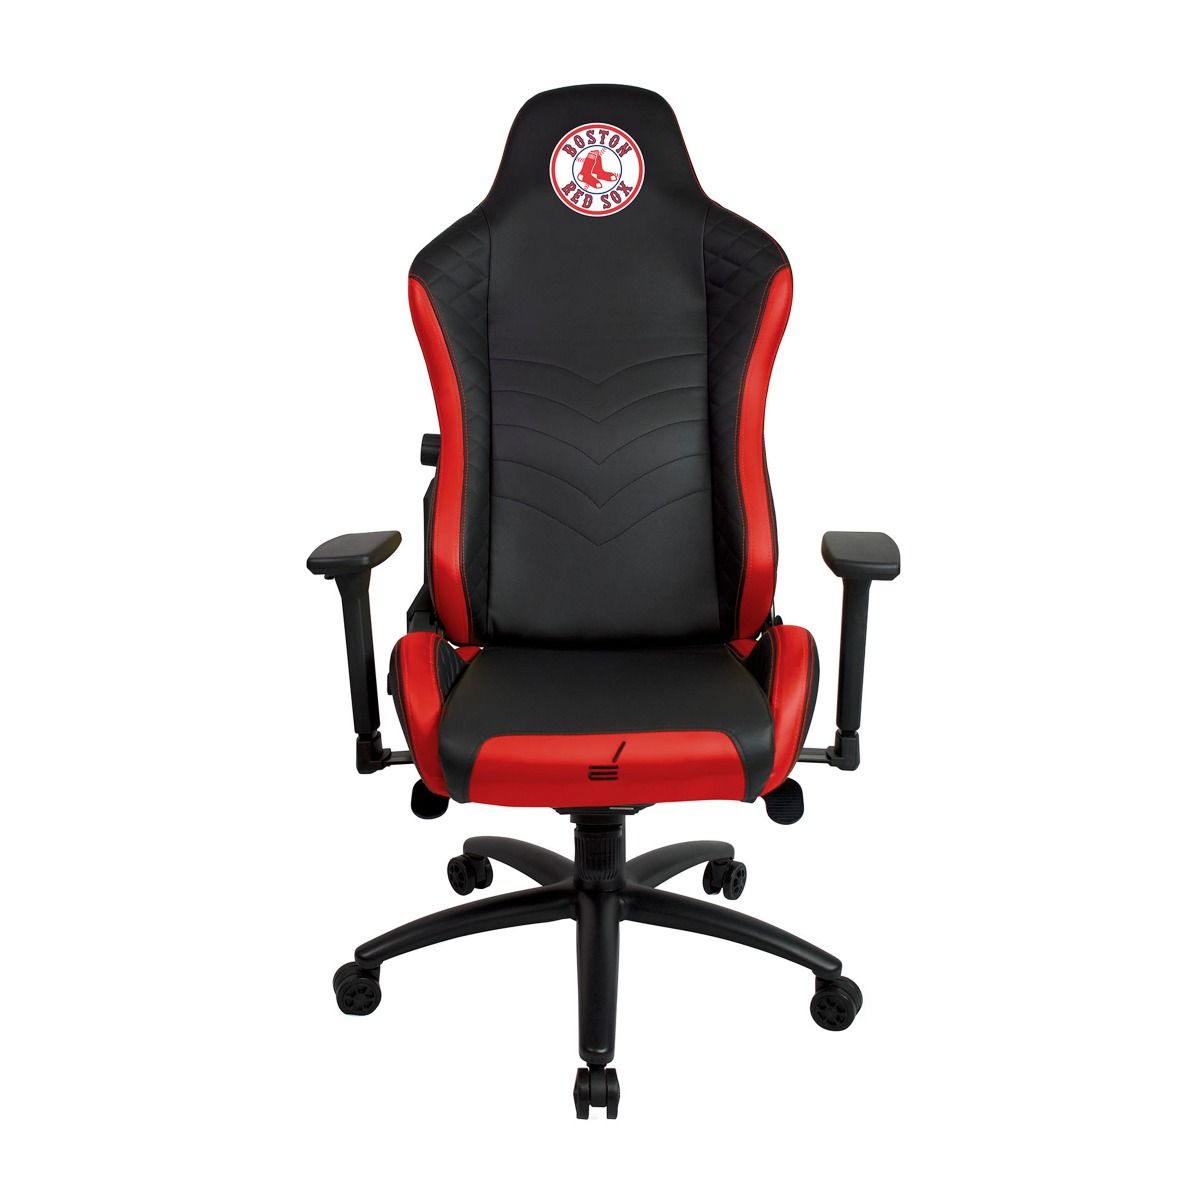 Imperial Boston Red Sox Pro Series Game Chair